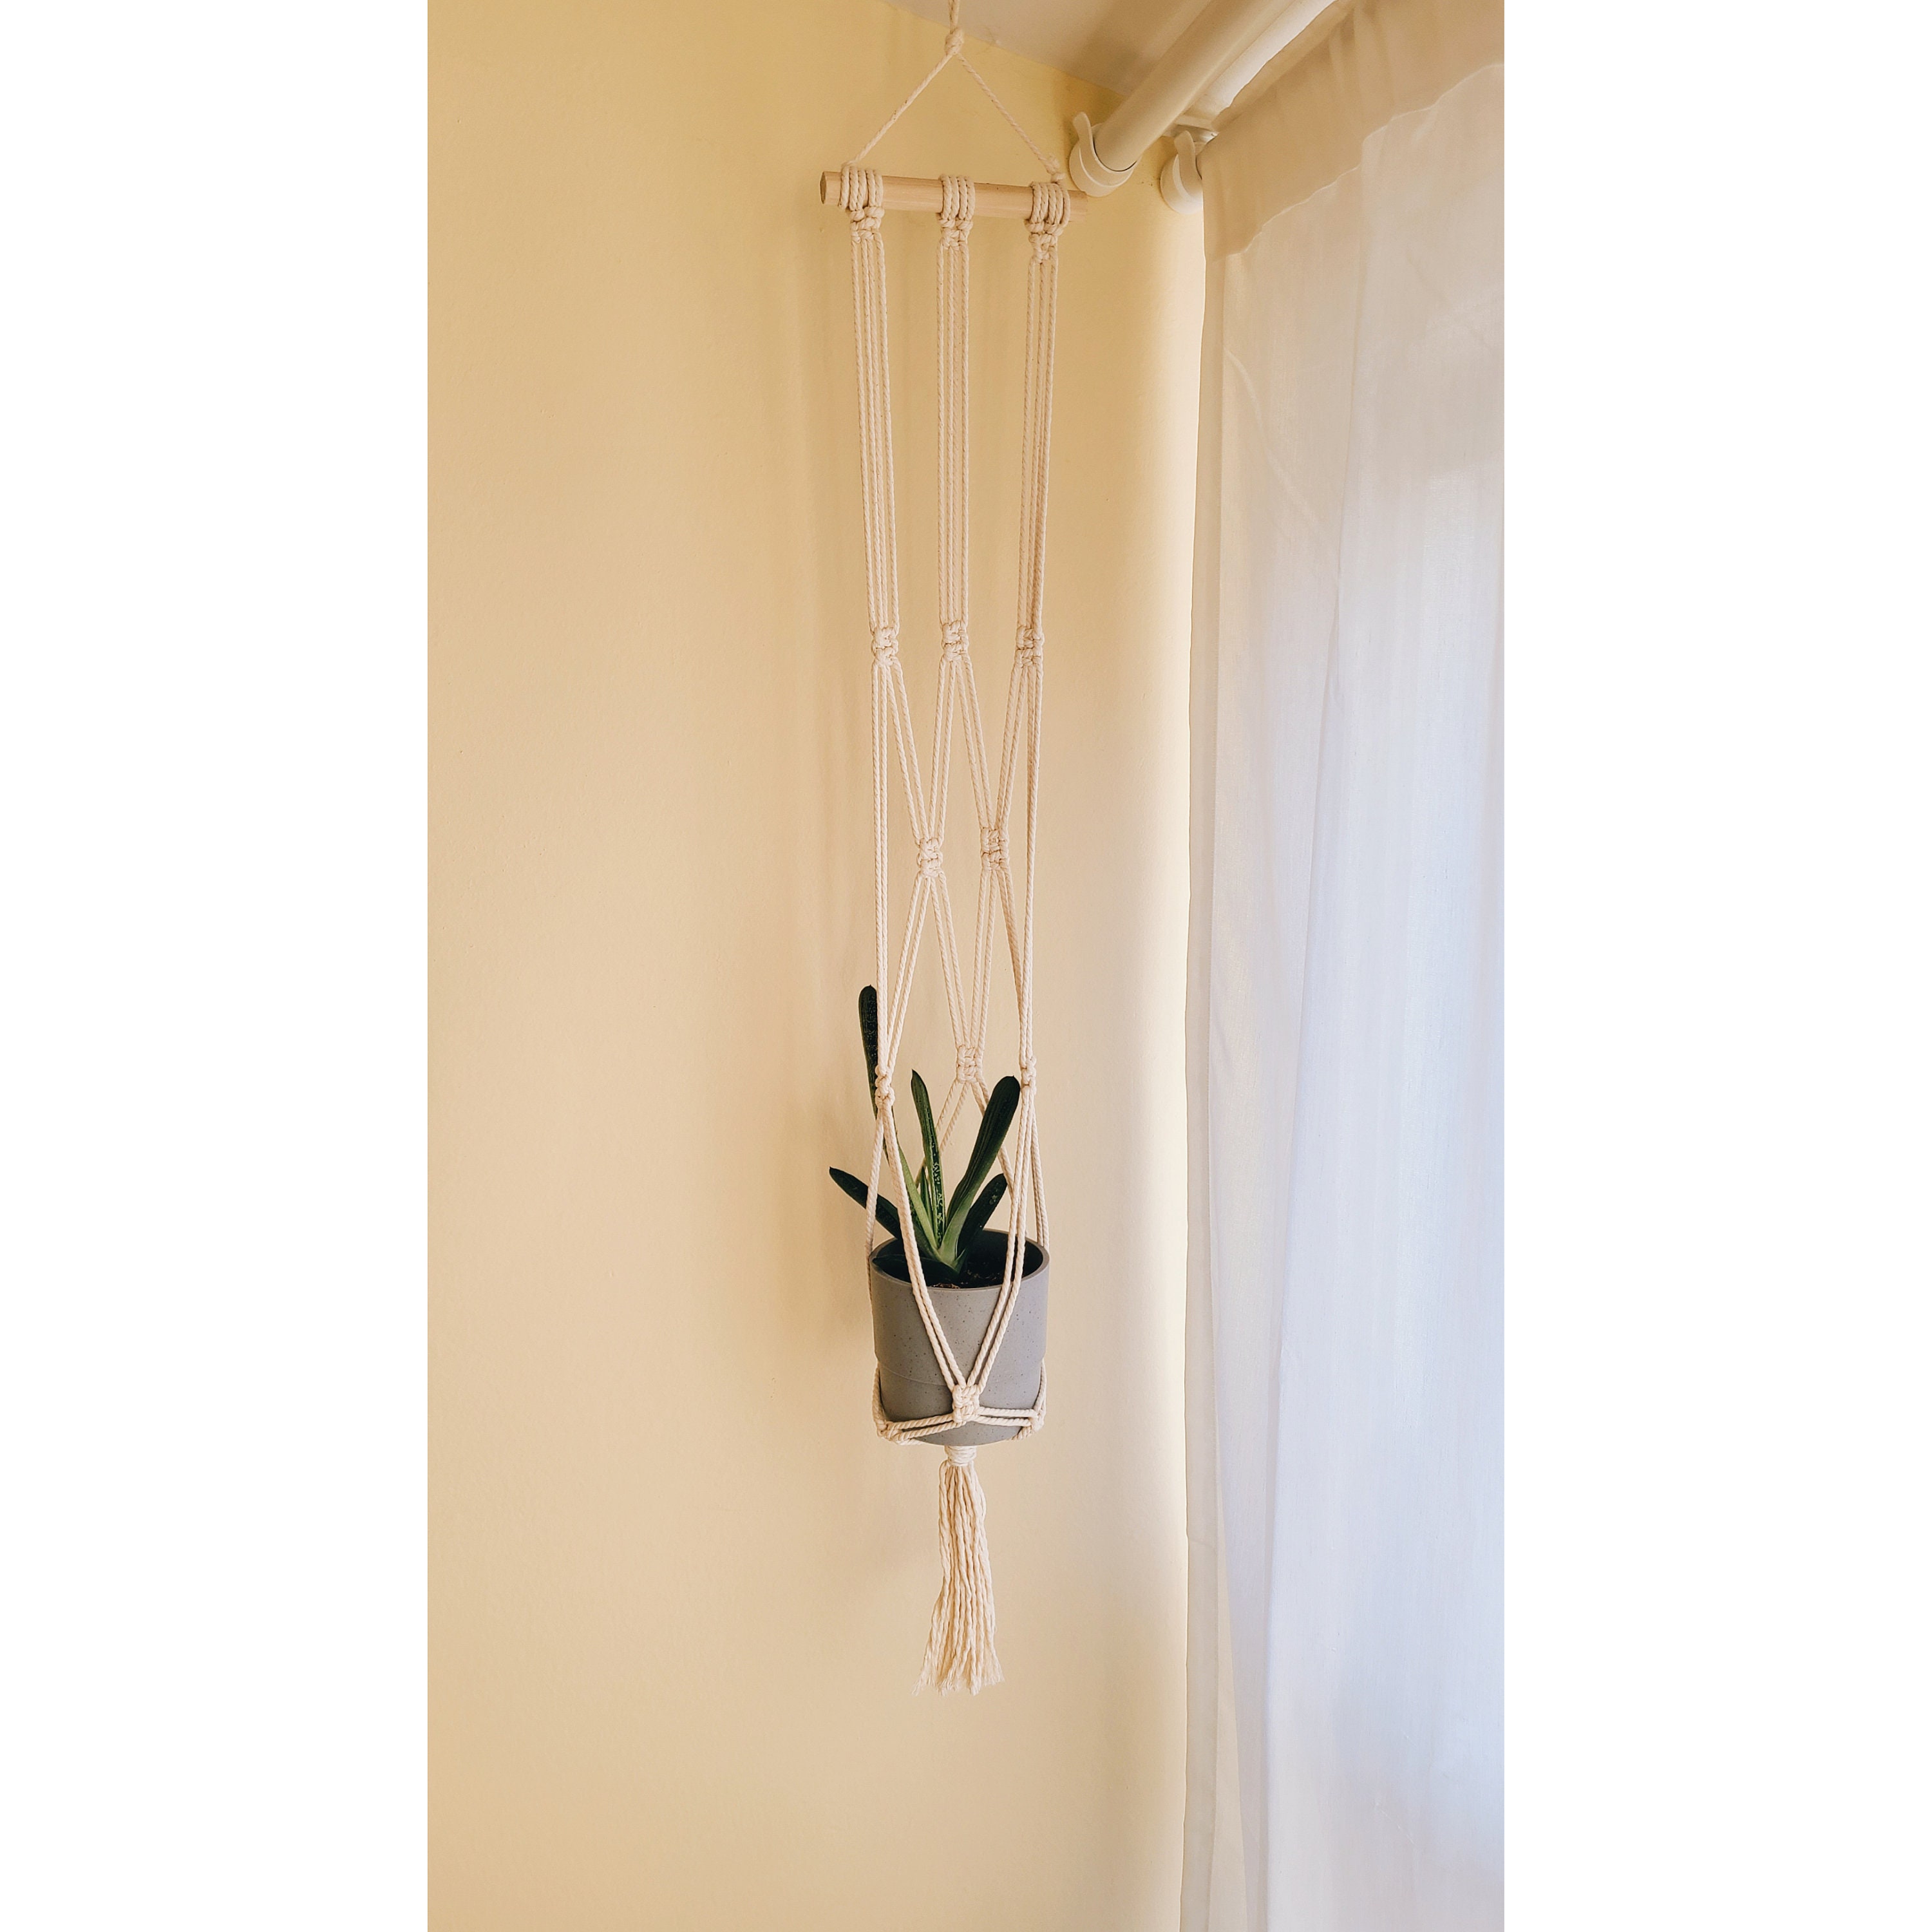 Tapestry Hangers for Small Furoshiki Plastic Hanger Kit CF-007 for Any Thin  Fabric to Display Tapestry Hangers/wall Hangers 